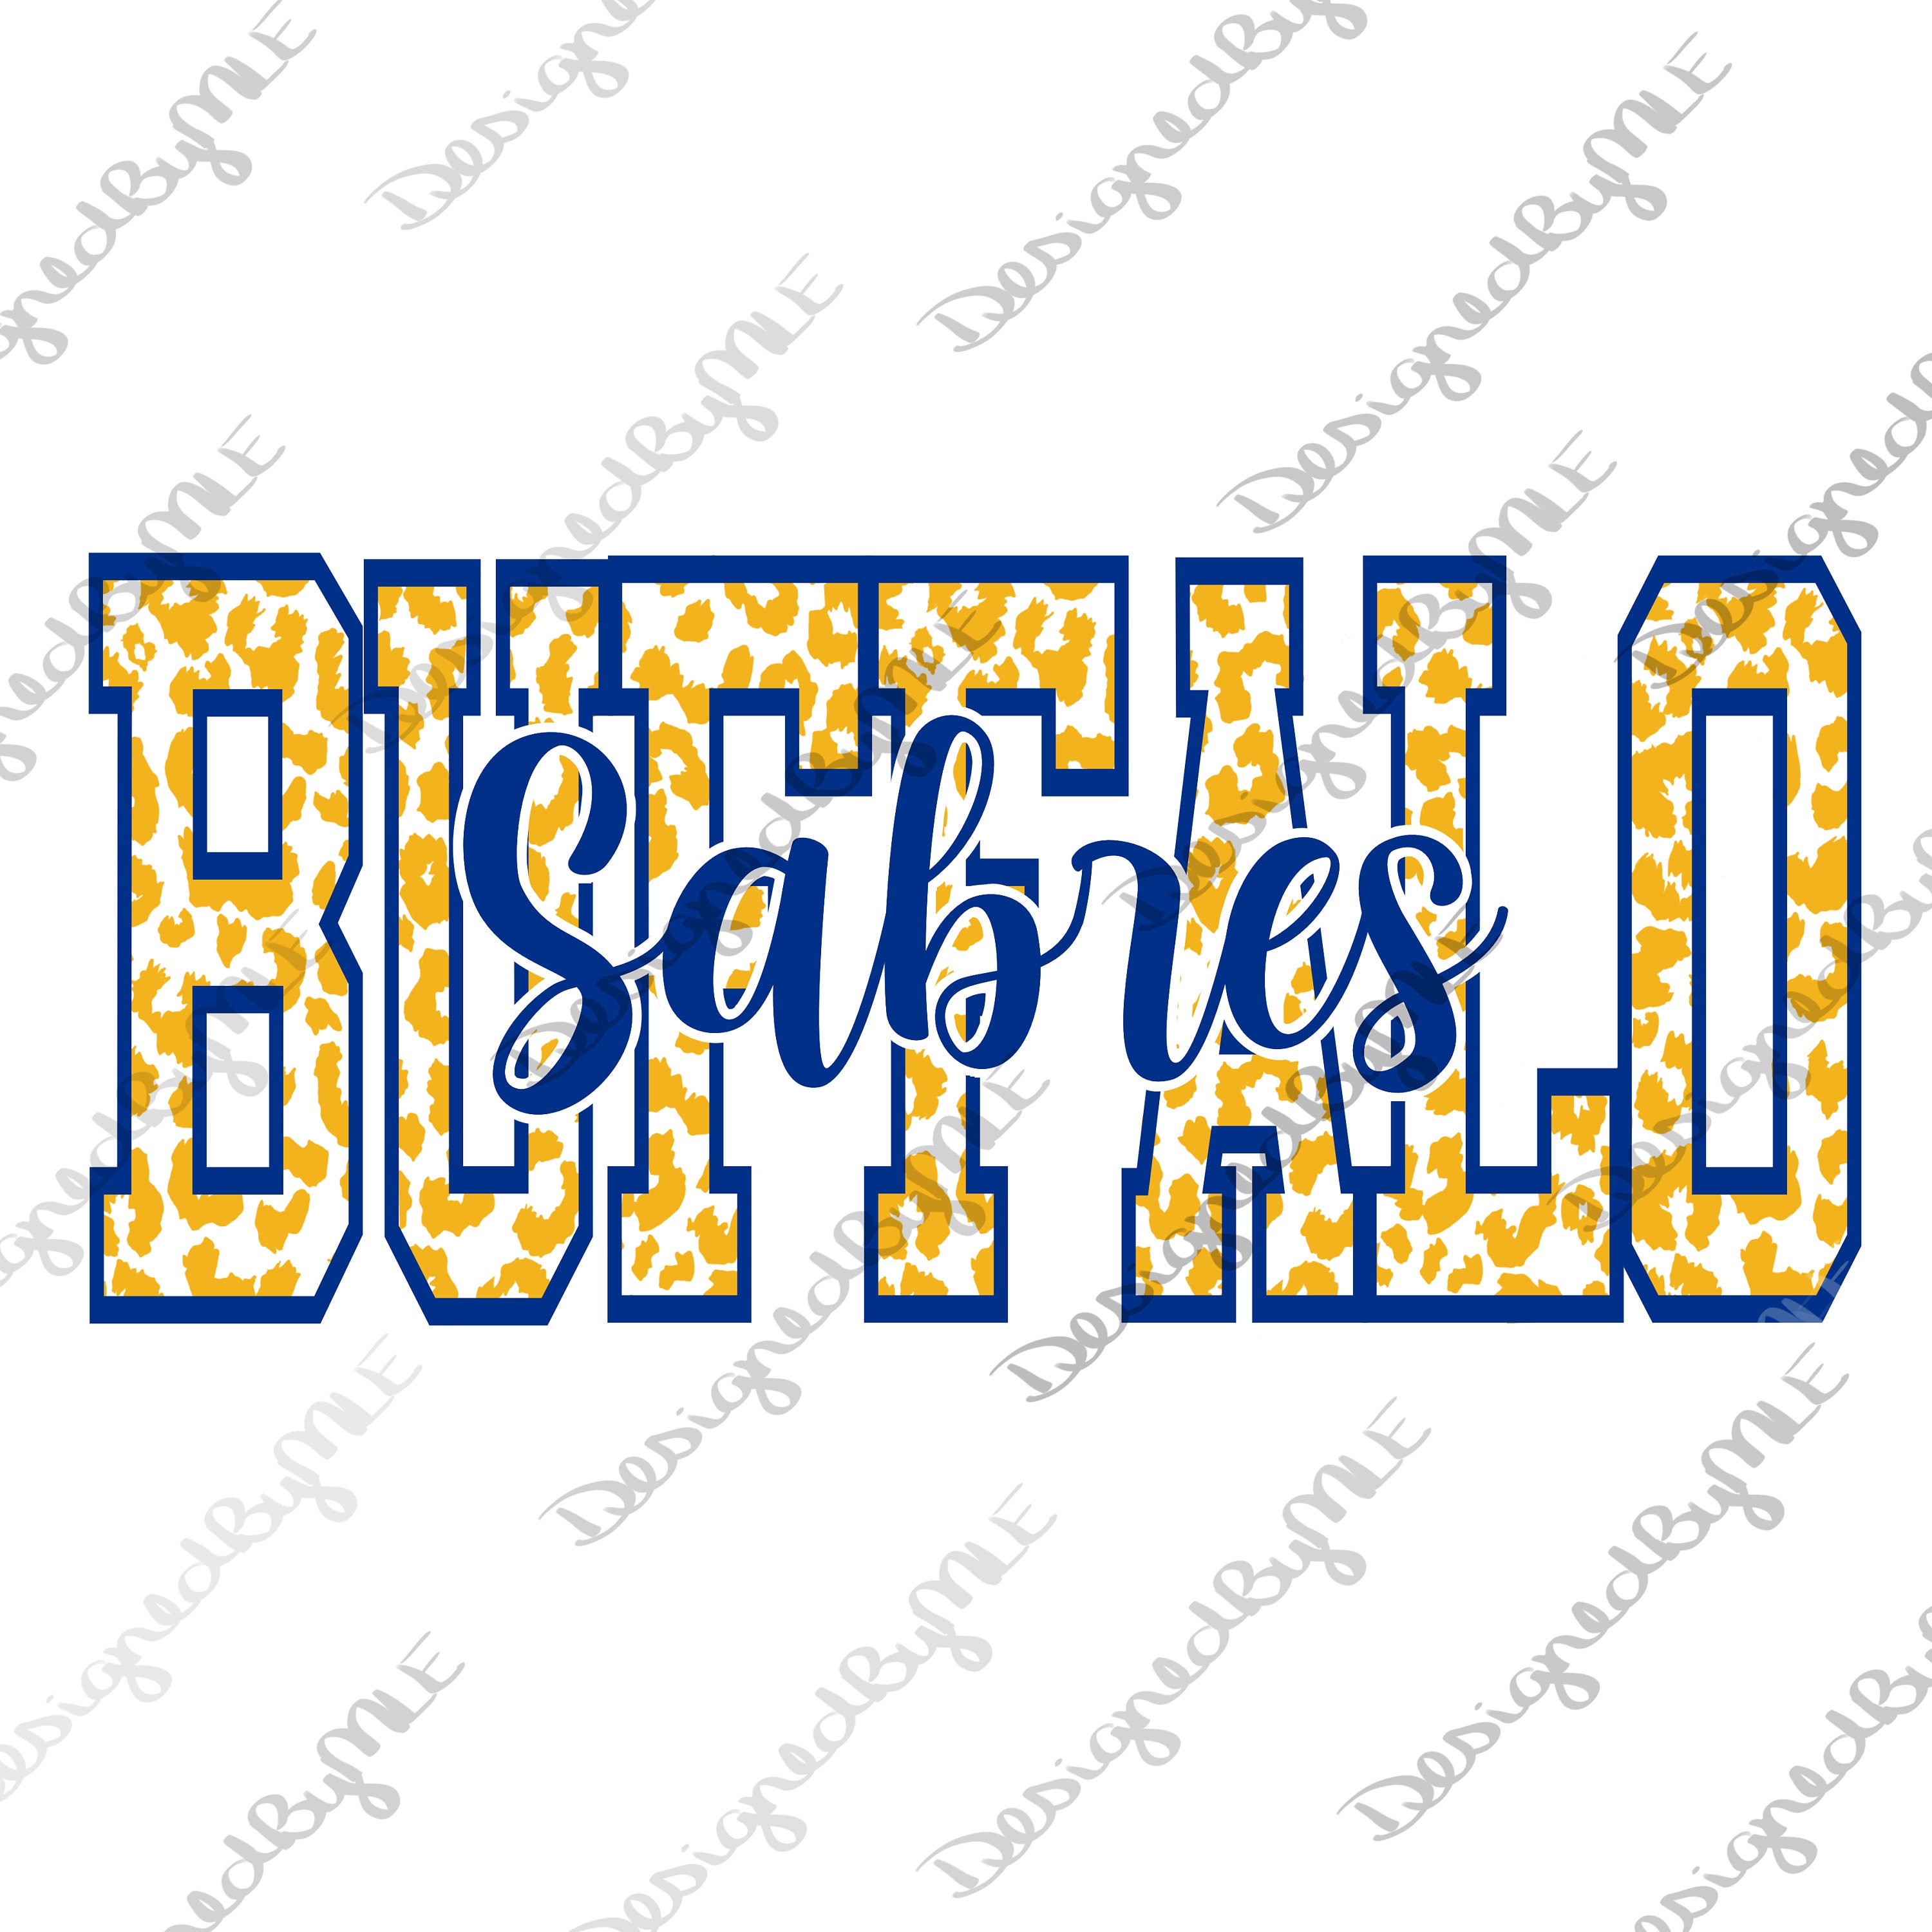 Buffalo Sabres Hoodie 3D Vintage Red Swords Sabres Gift - Personalized  Gifts: Family, Sports, Occasions, Trending